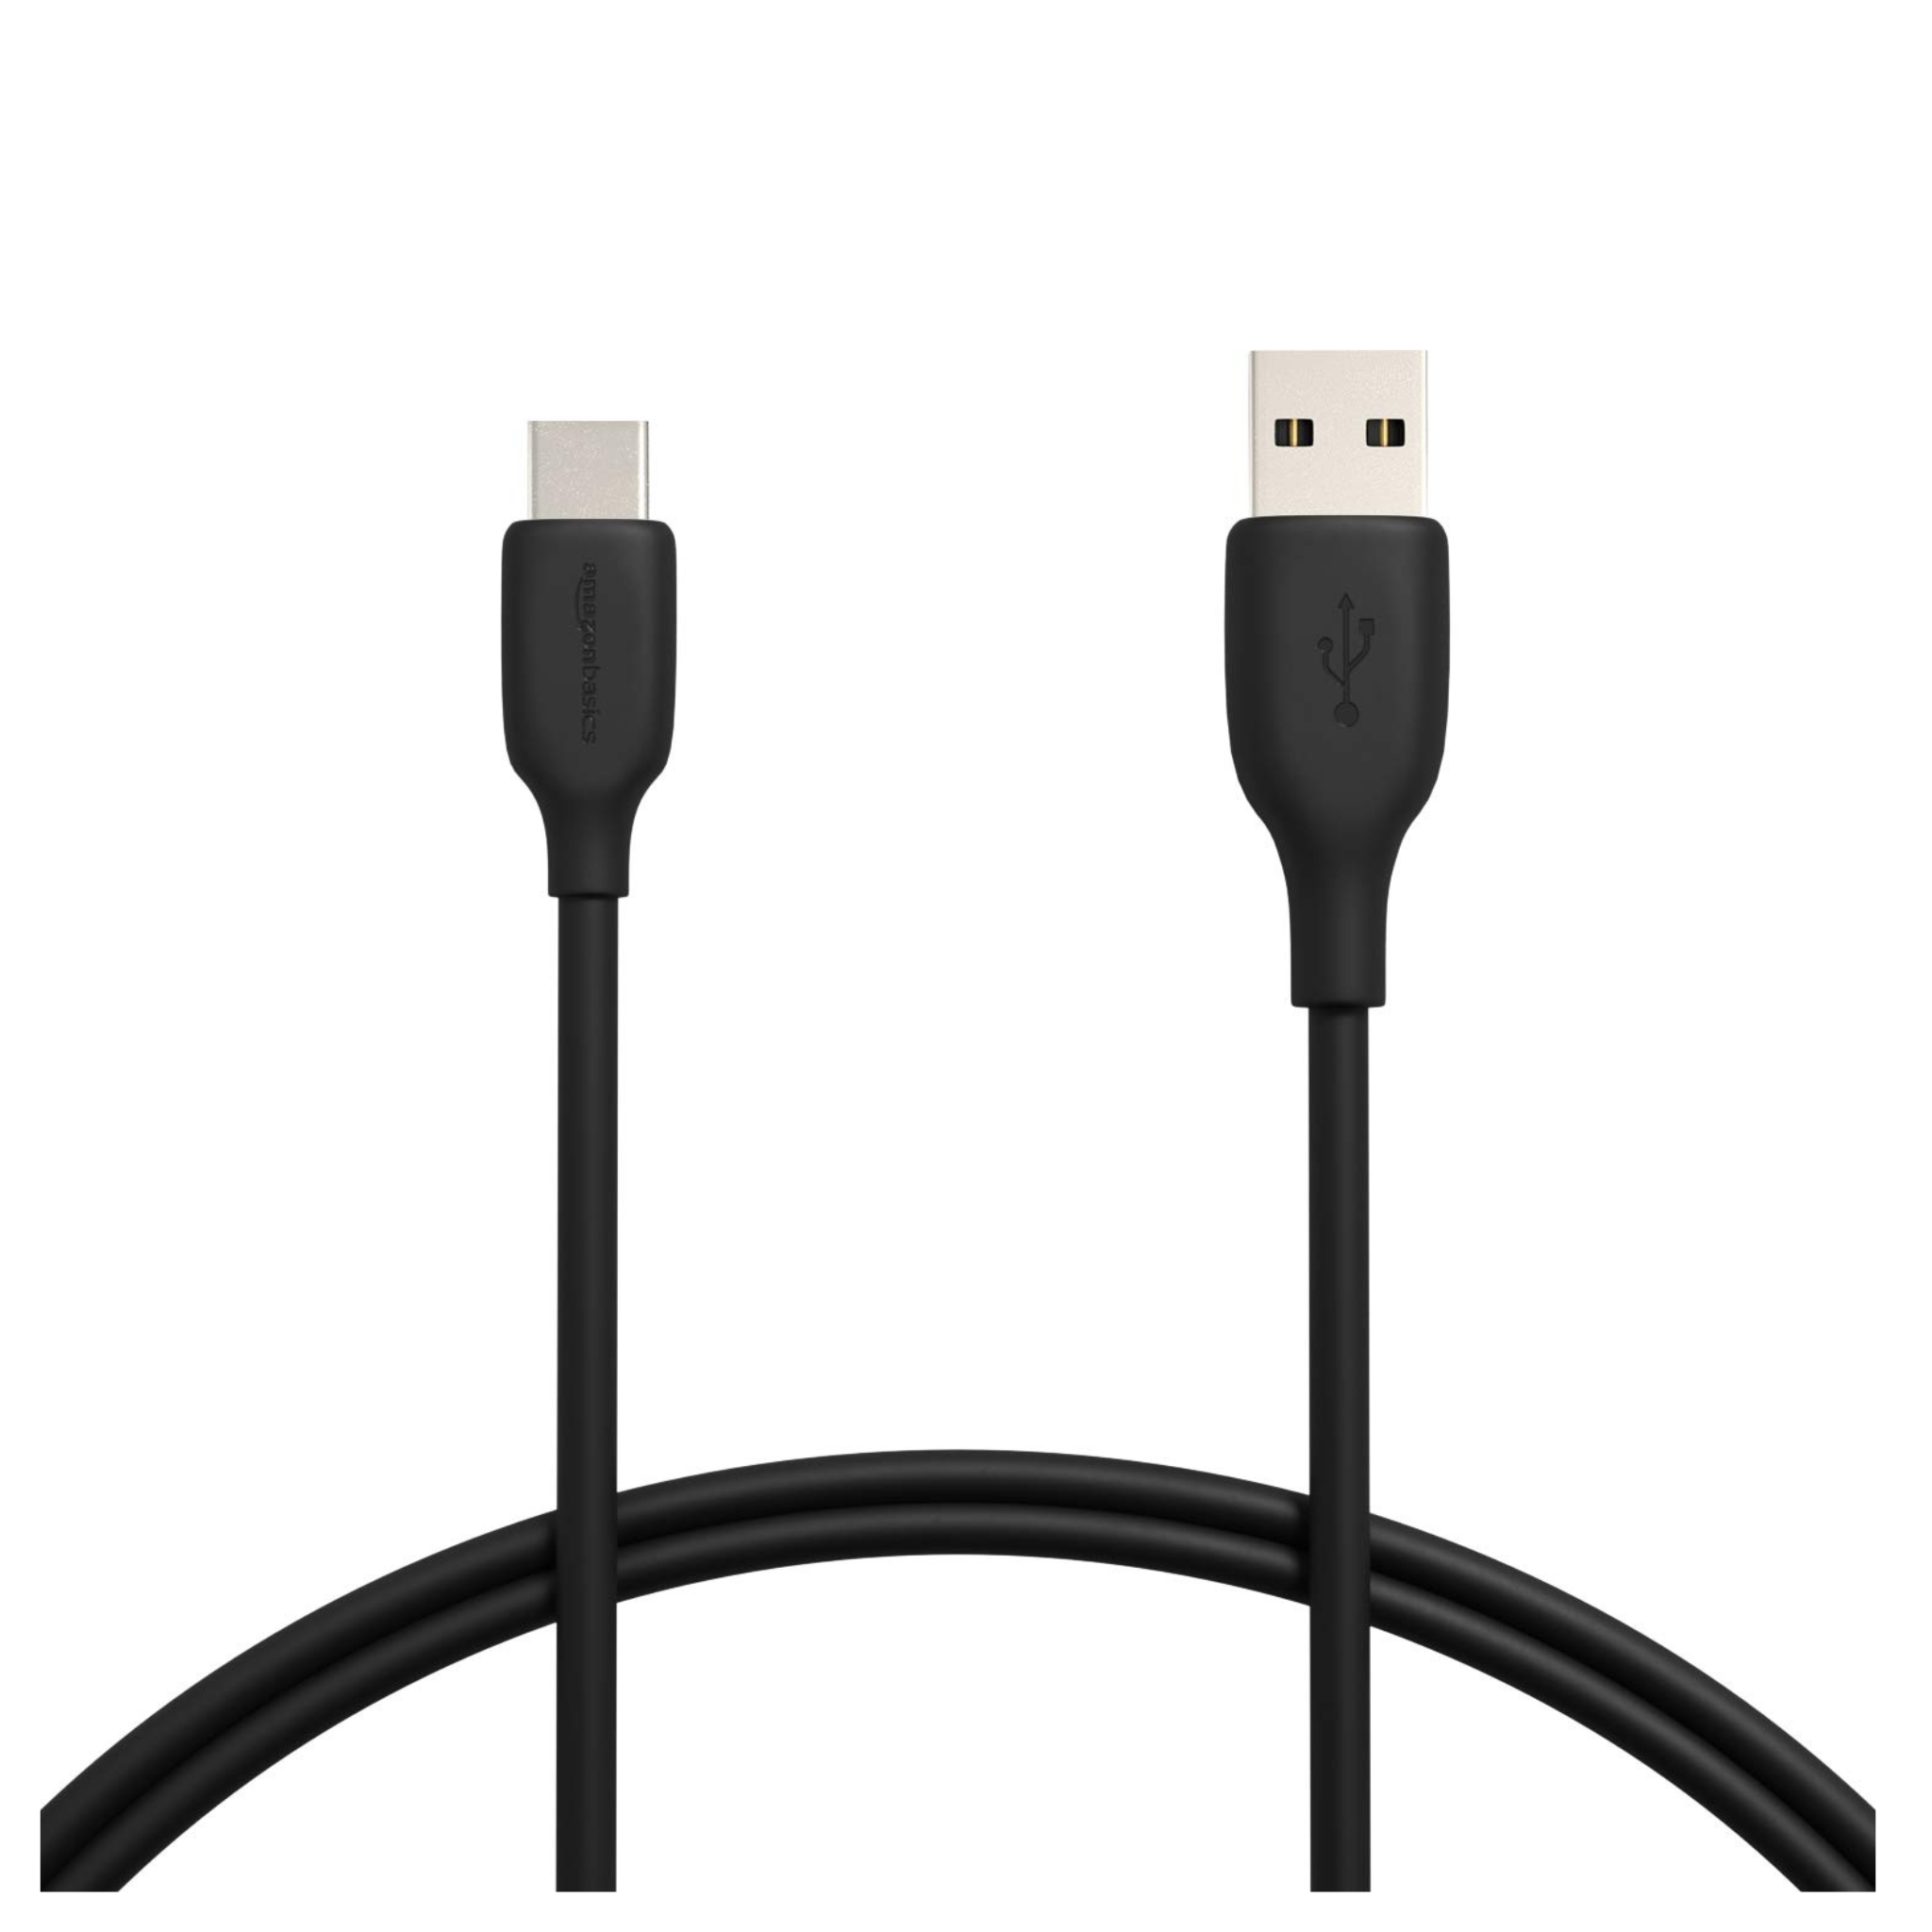 Amazon Basics 3 Foot USB-C to USB-A 2.0 Fast Charger Cable